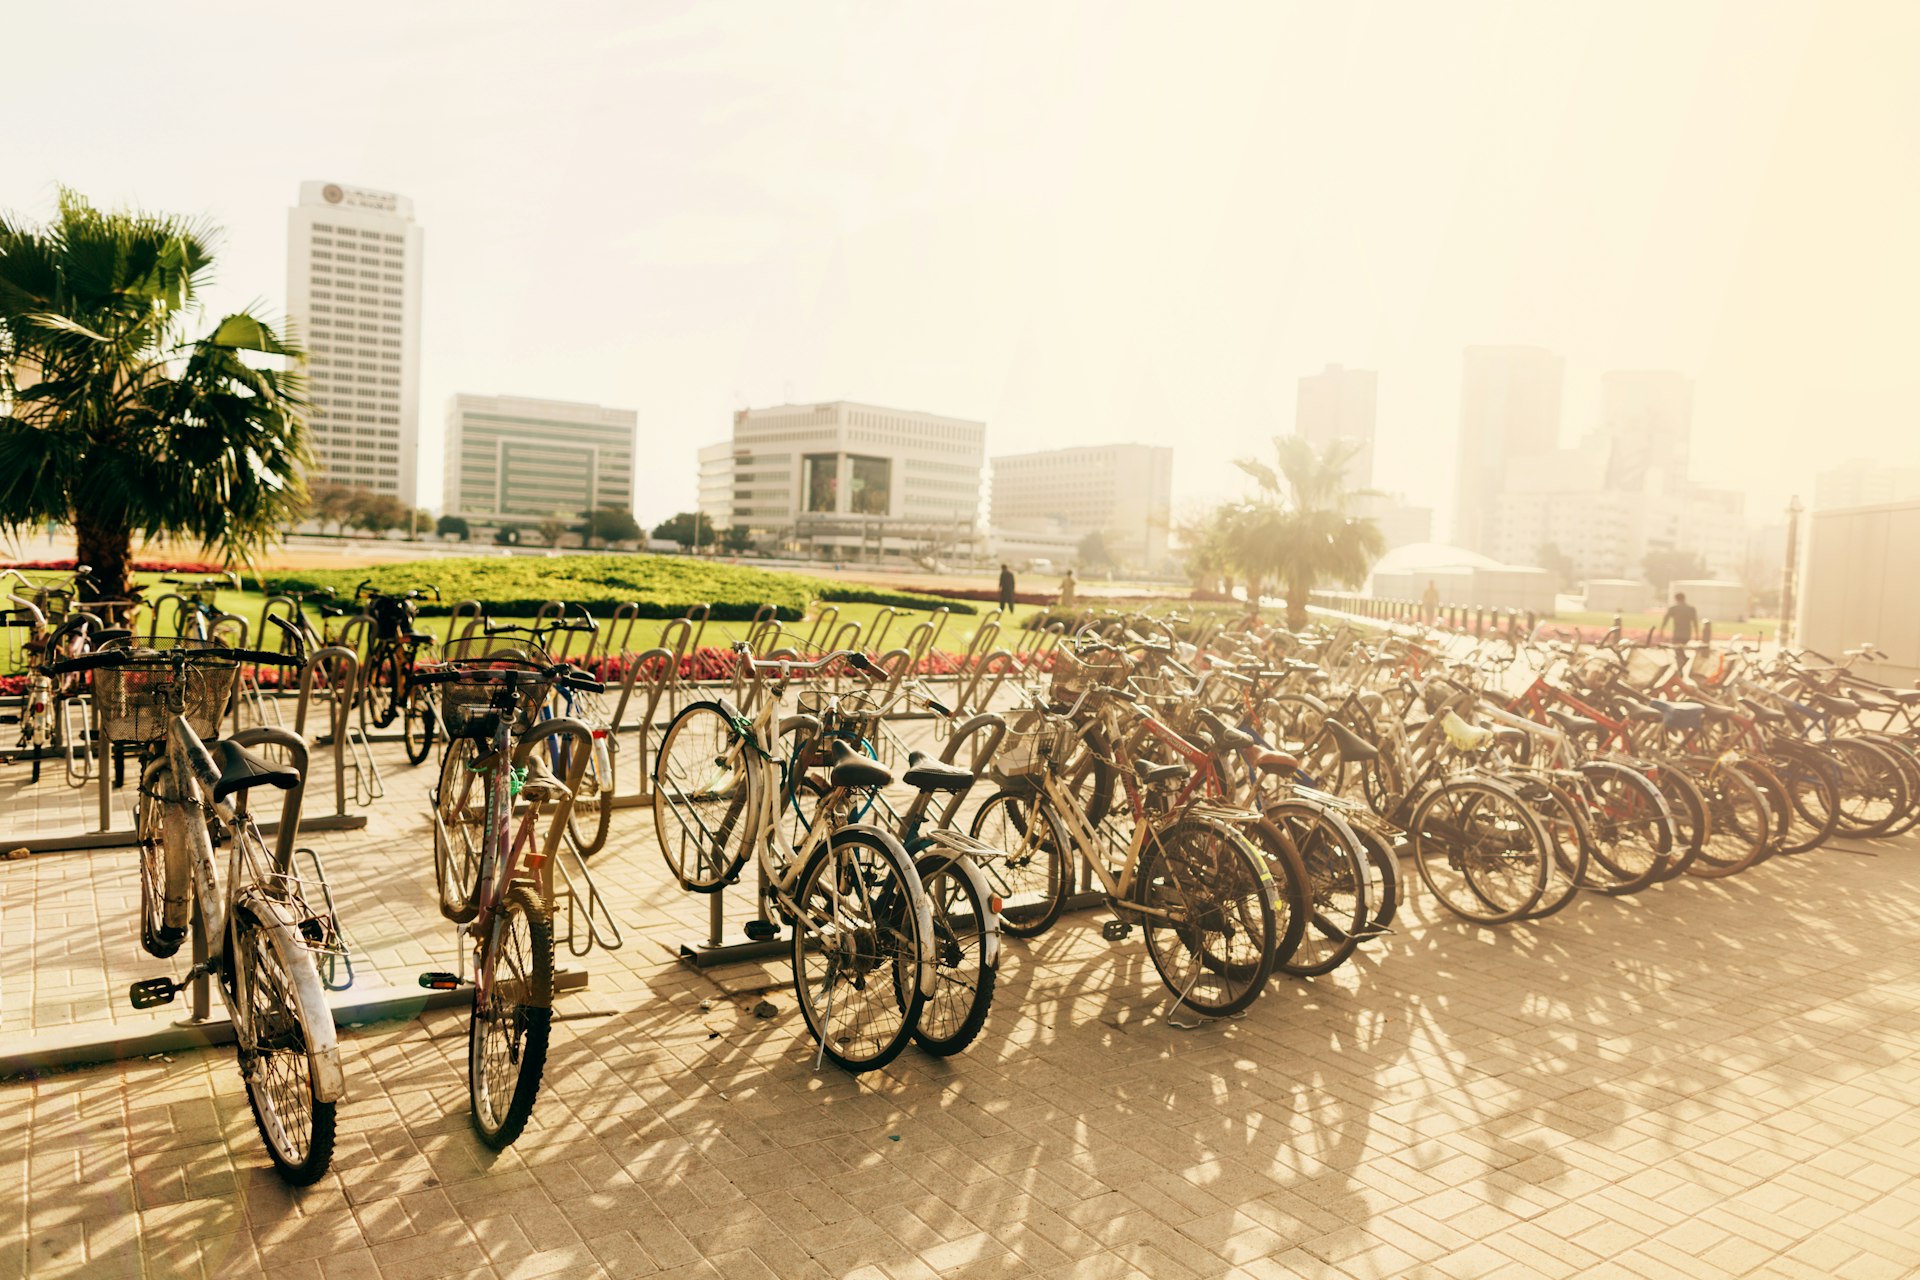 Bicycles parked on the street in Dubai, United Arab Emirates